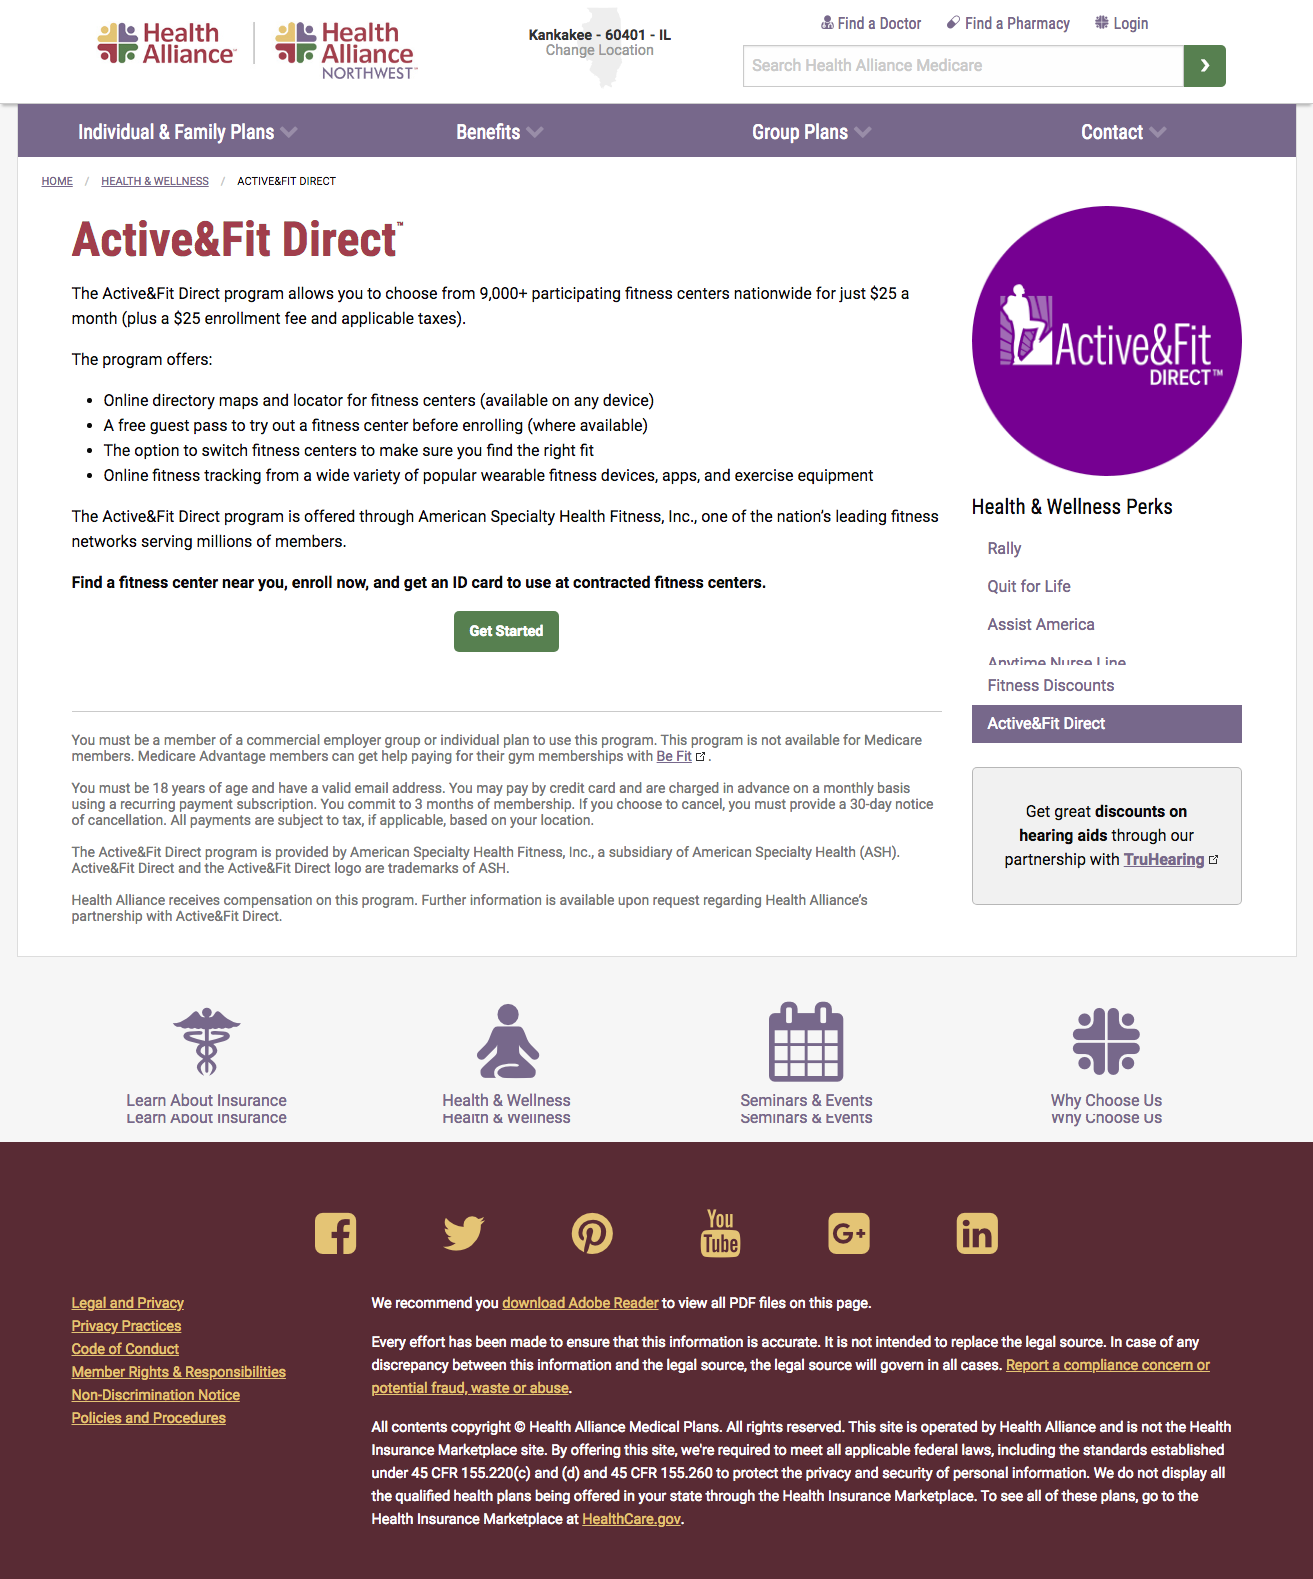 Active&FitDirect landing page